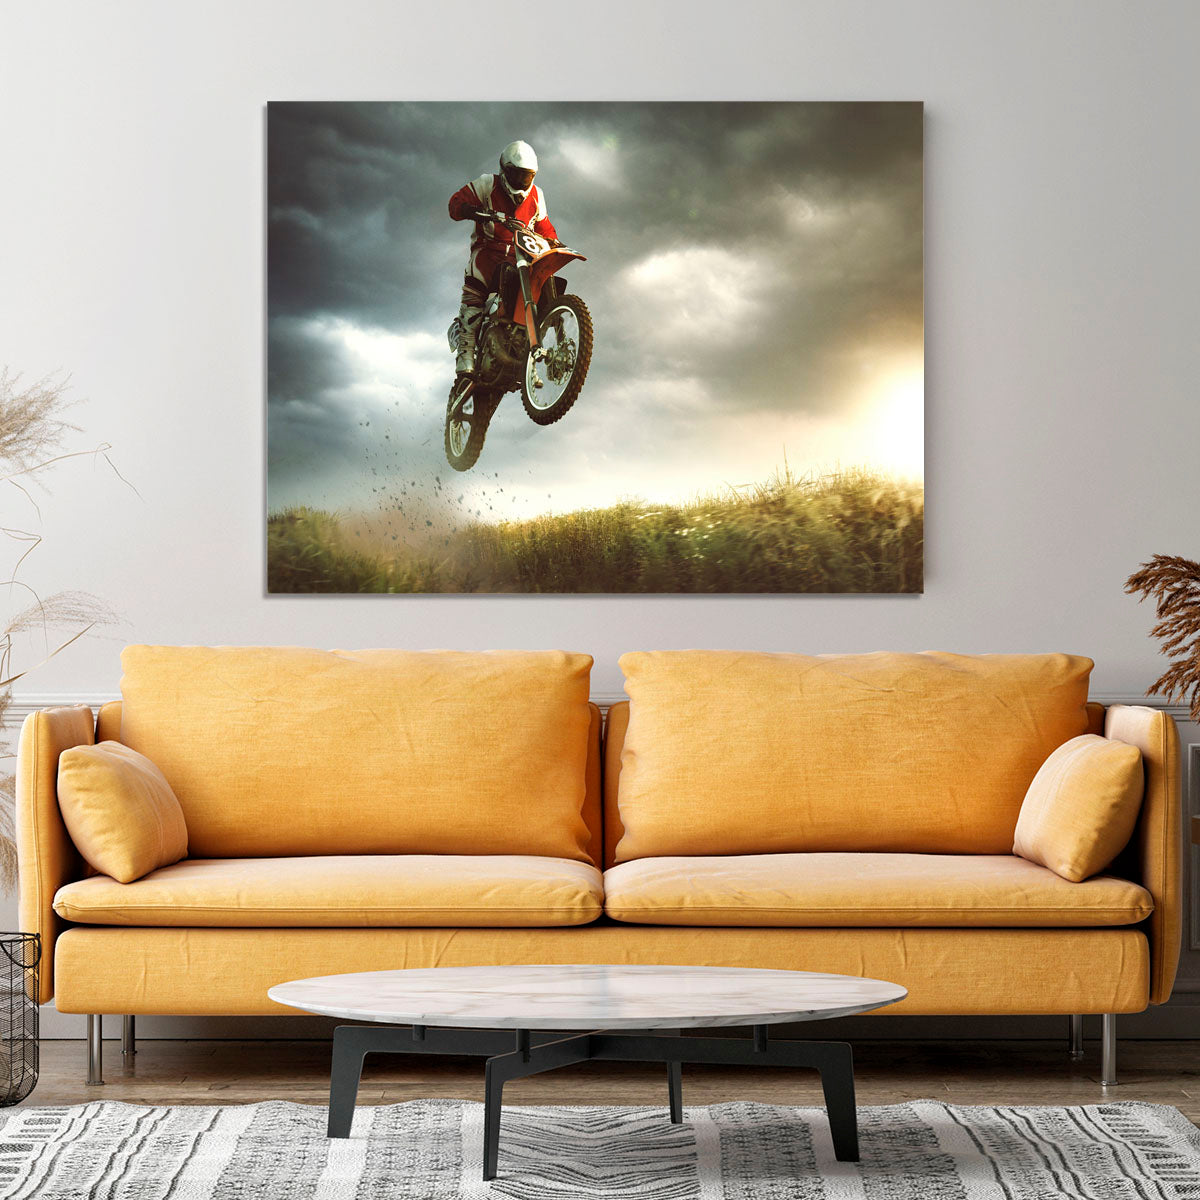 Motorbike jumps in the air Canvas Print or Poster - Canvas Art Rocks - 4